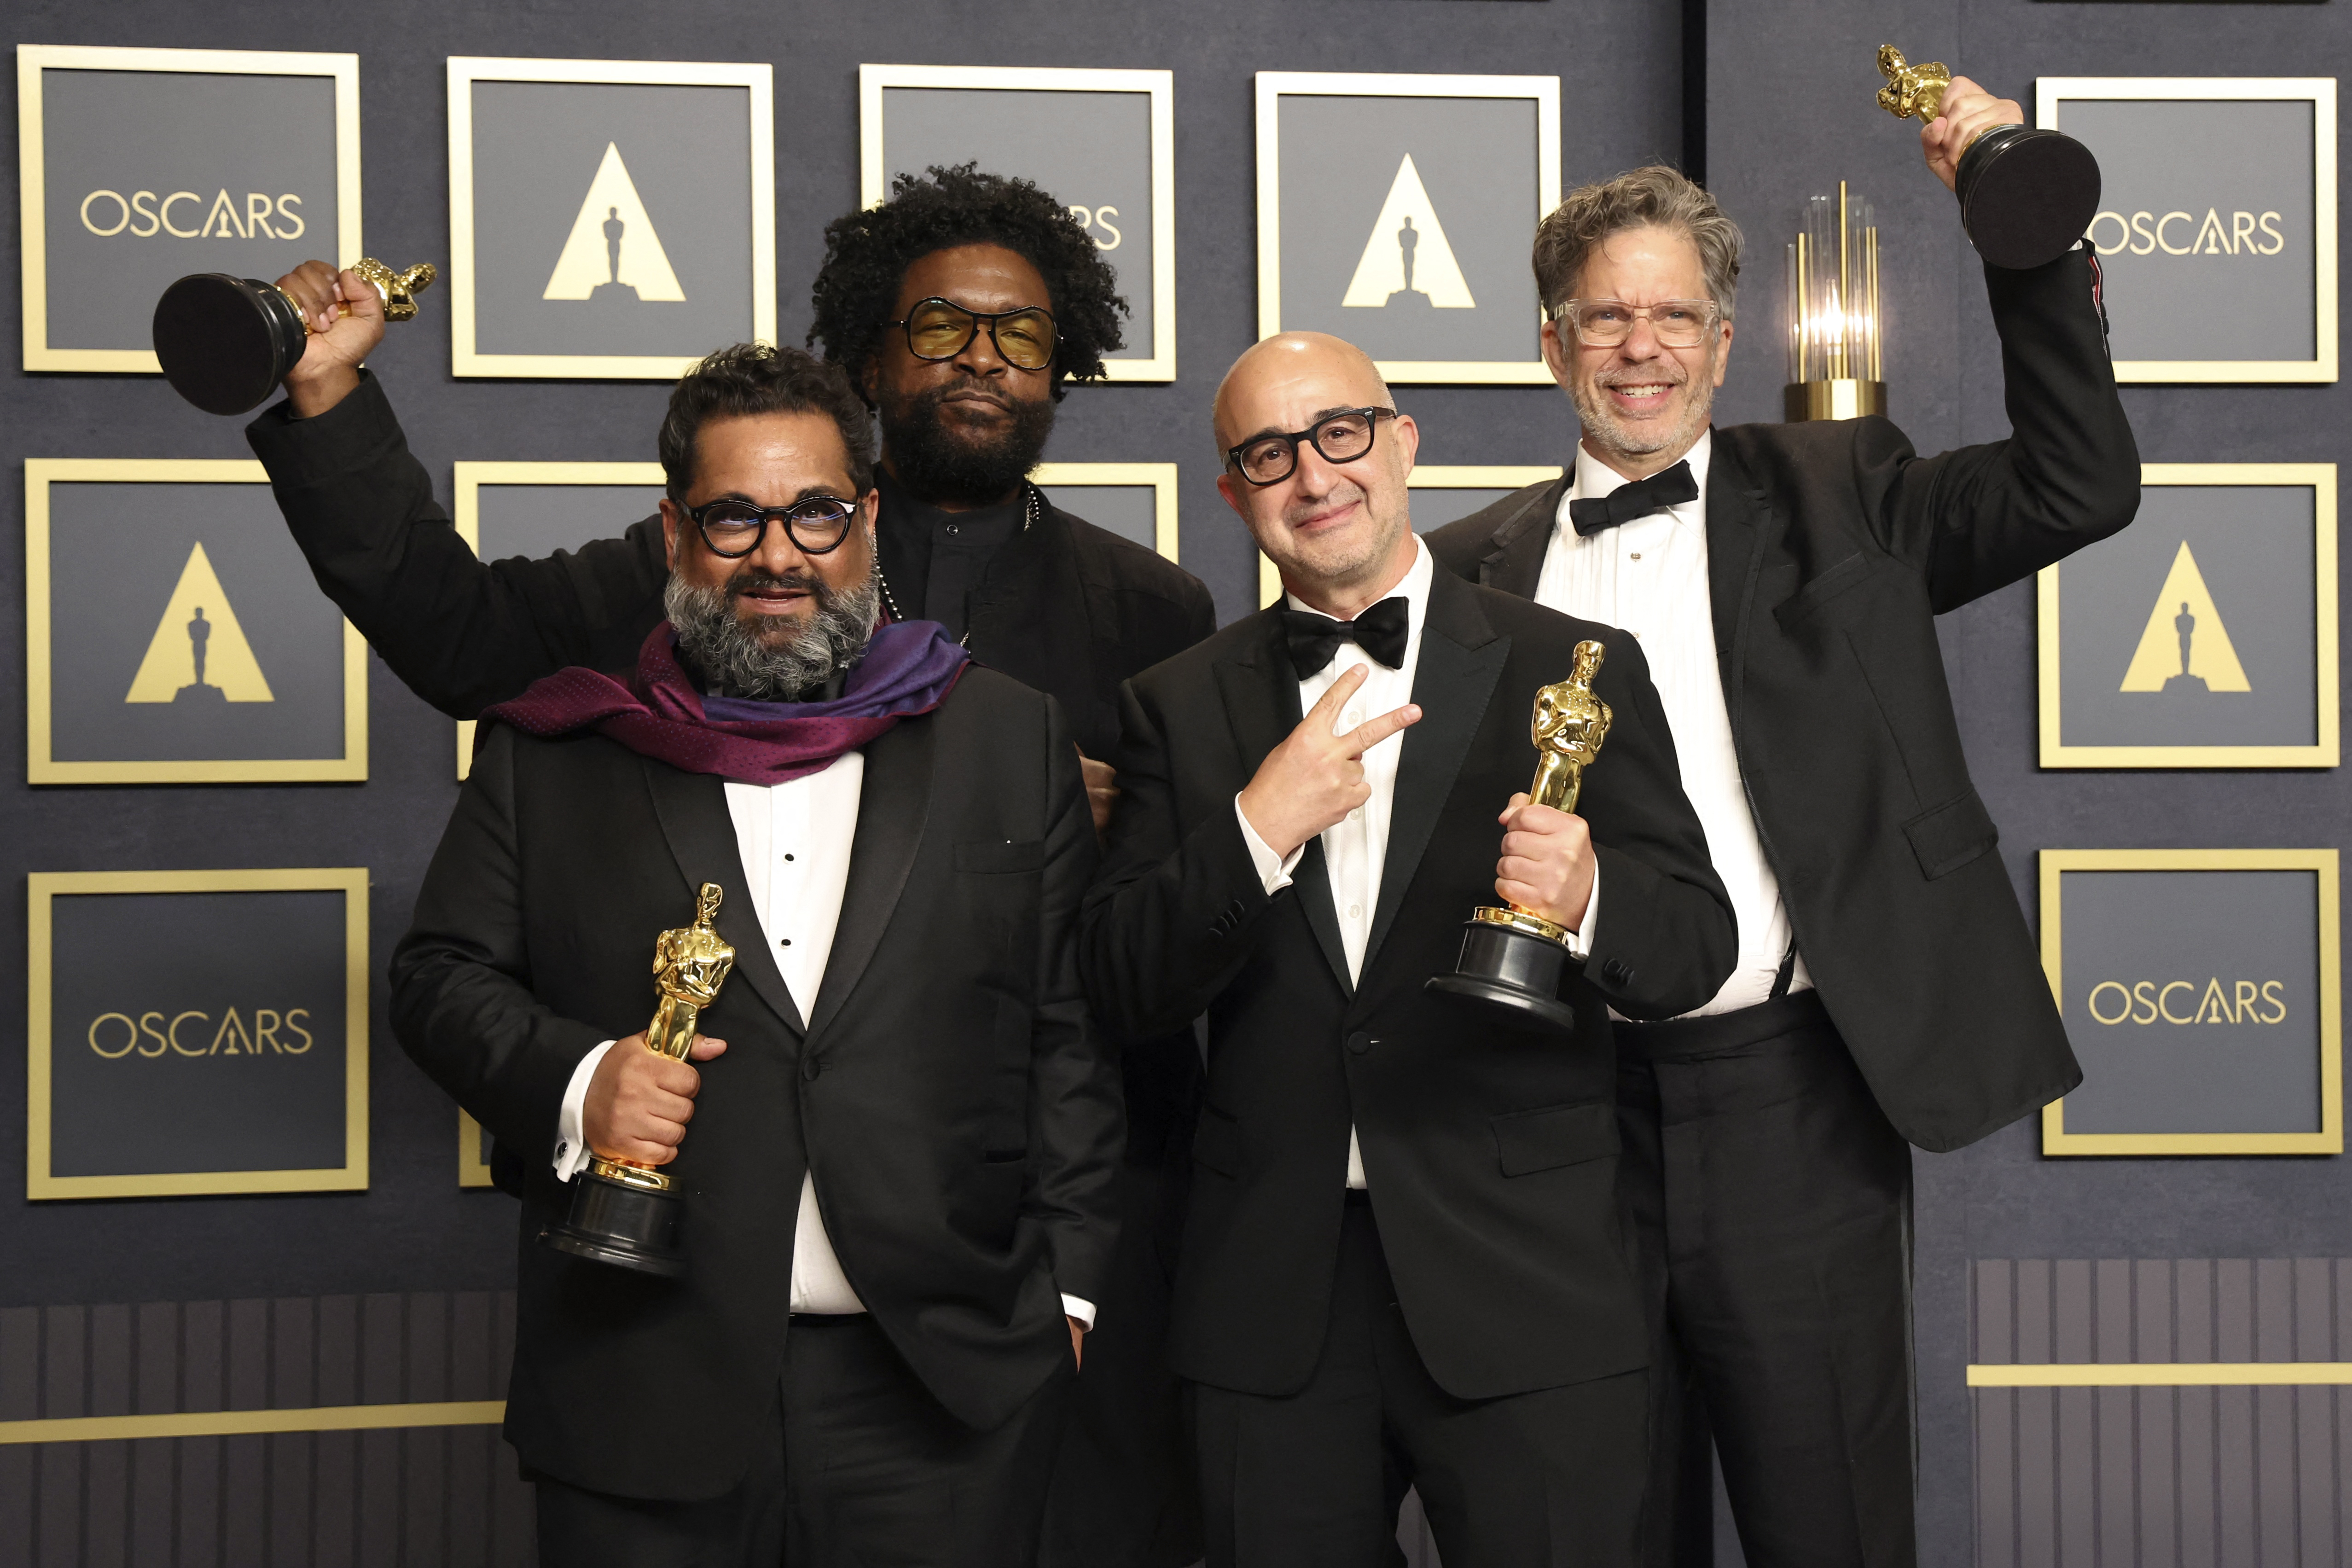 Ahmir "questlove" Thompson, Joseph Patel, Robert Fyvolent and David Dinerstein with the Best Documentary Oscar for "Summer of the Soul (REUTERS/Mario Anzuoni)